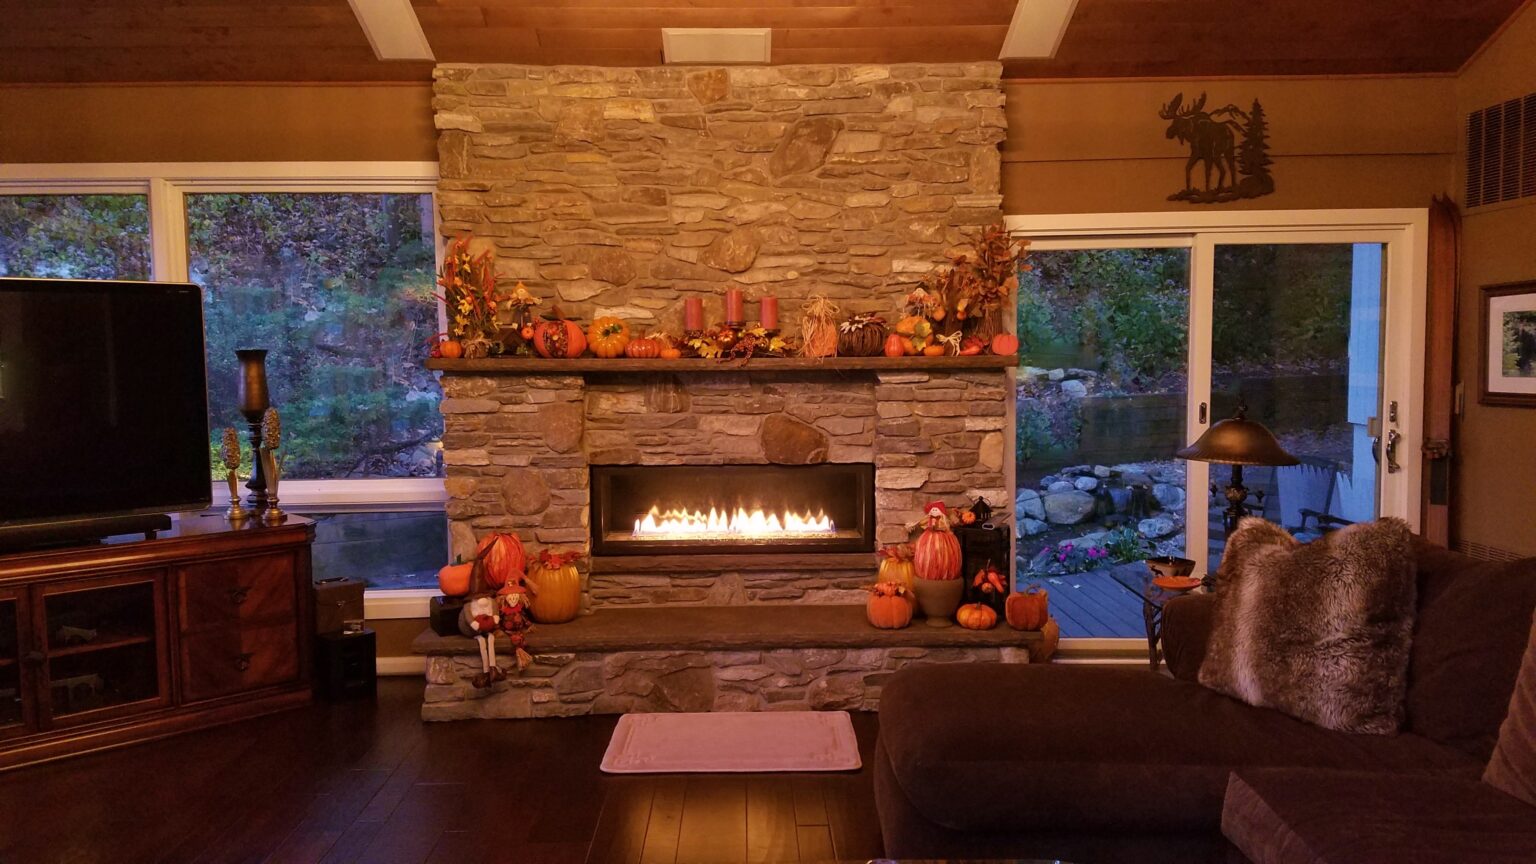 15 Stone Fireplace Ideas for a Cozy, Nature-Inspired Home